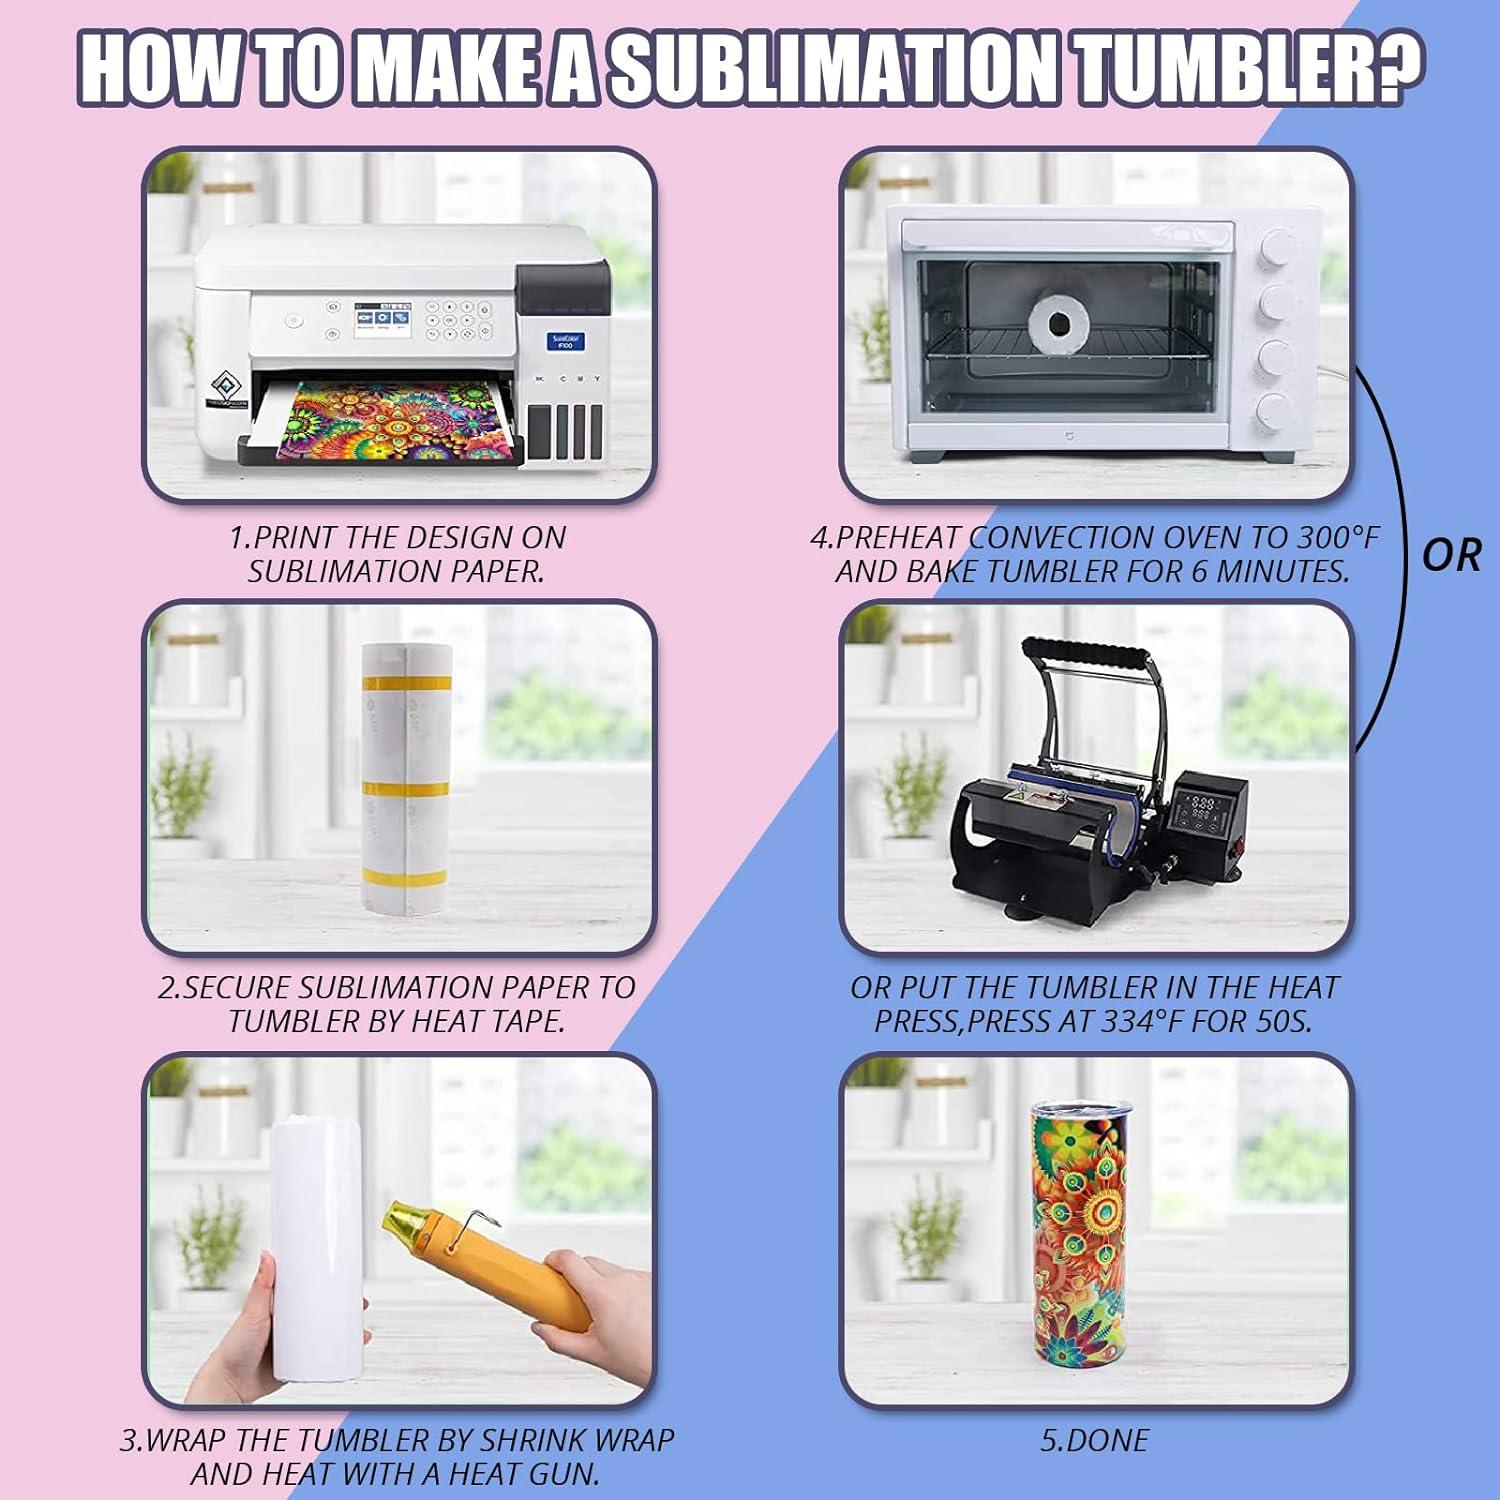 How to Sublimate a Tumbler Using Shrink Wrap & a Convection Oven